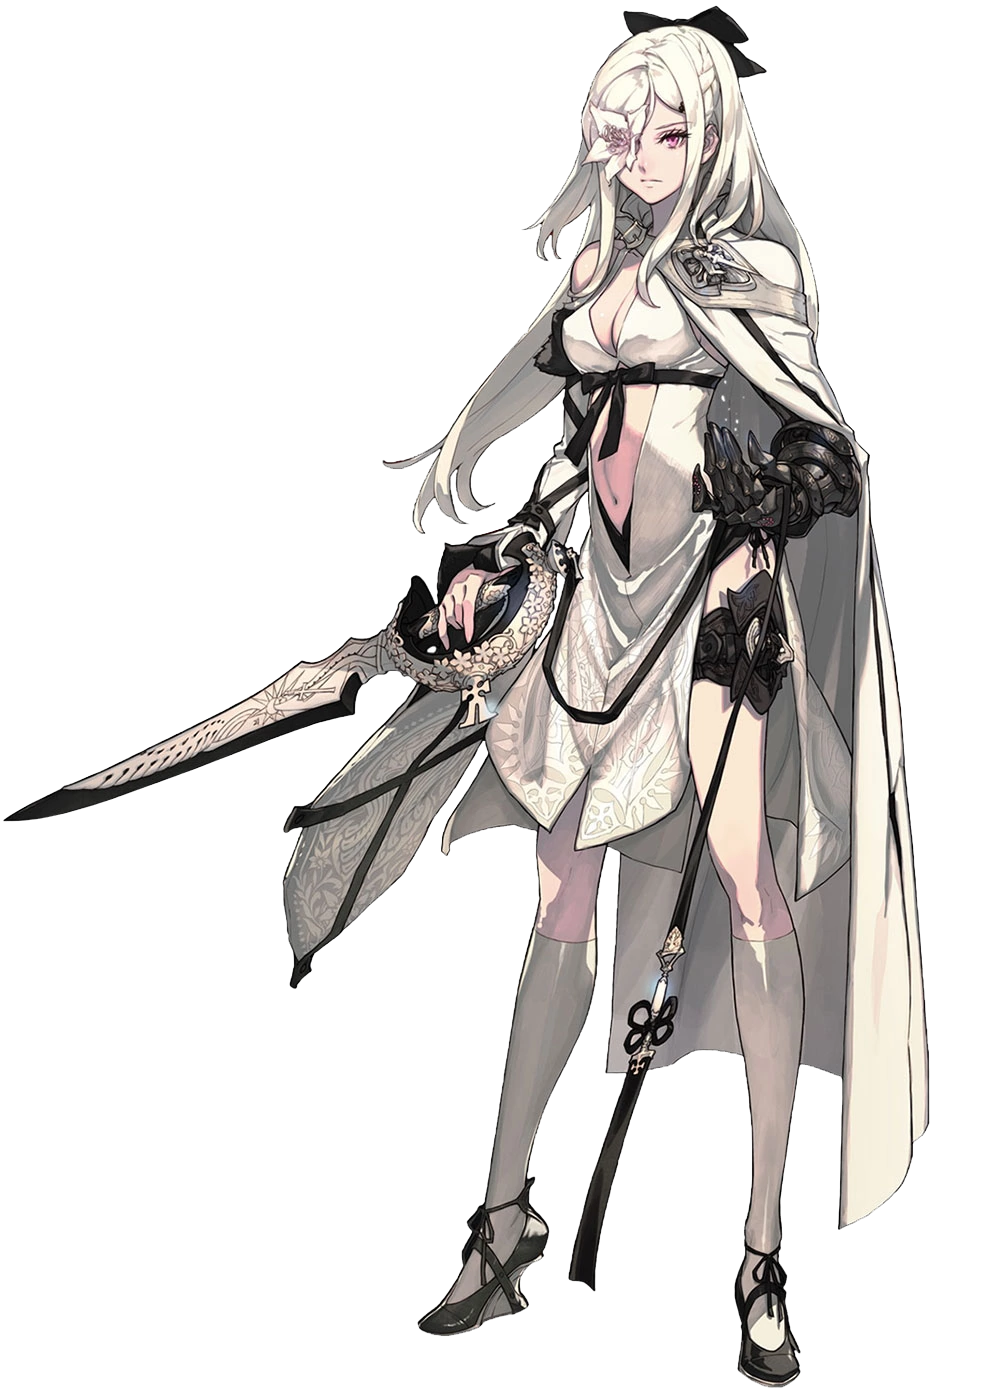 Zero, a thin, pale-skinned girl wearing a complex white outfit. She has a flower growing out of her right eye, and a mechanical arm.